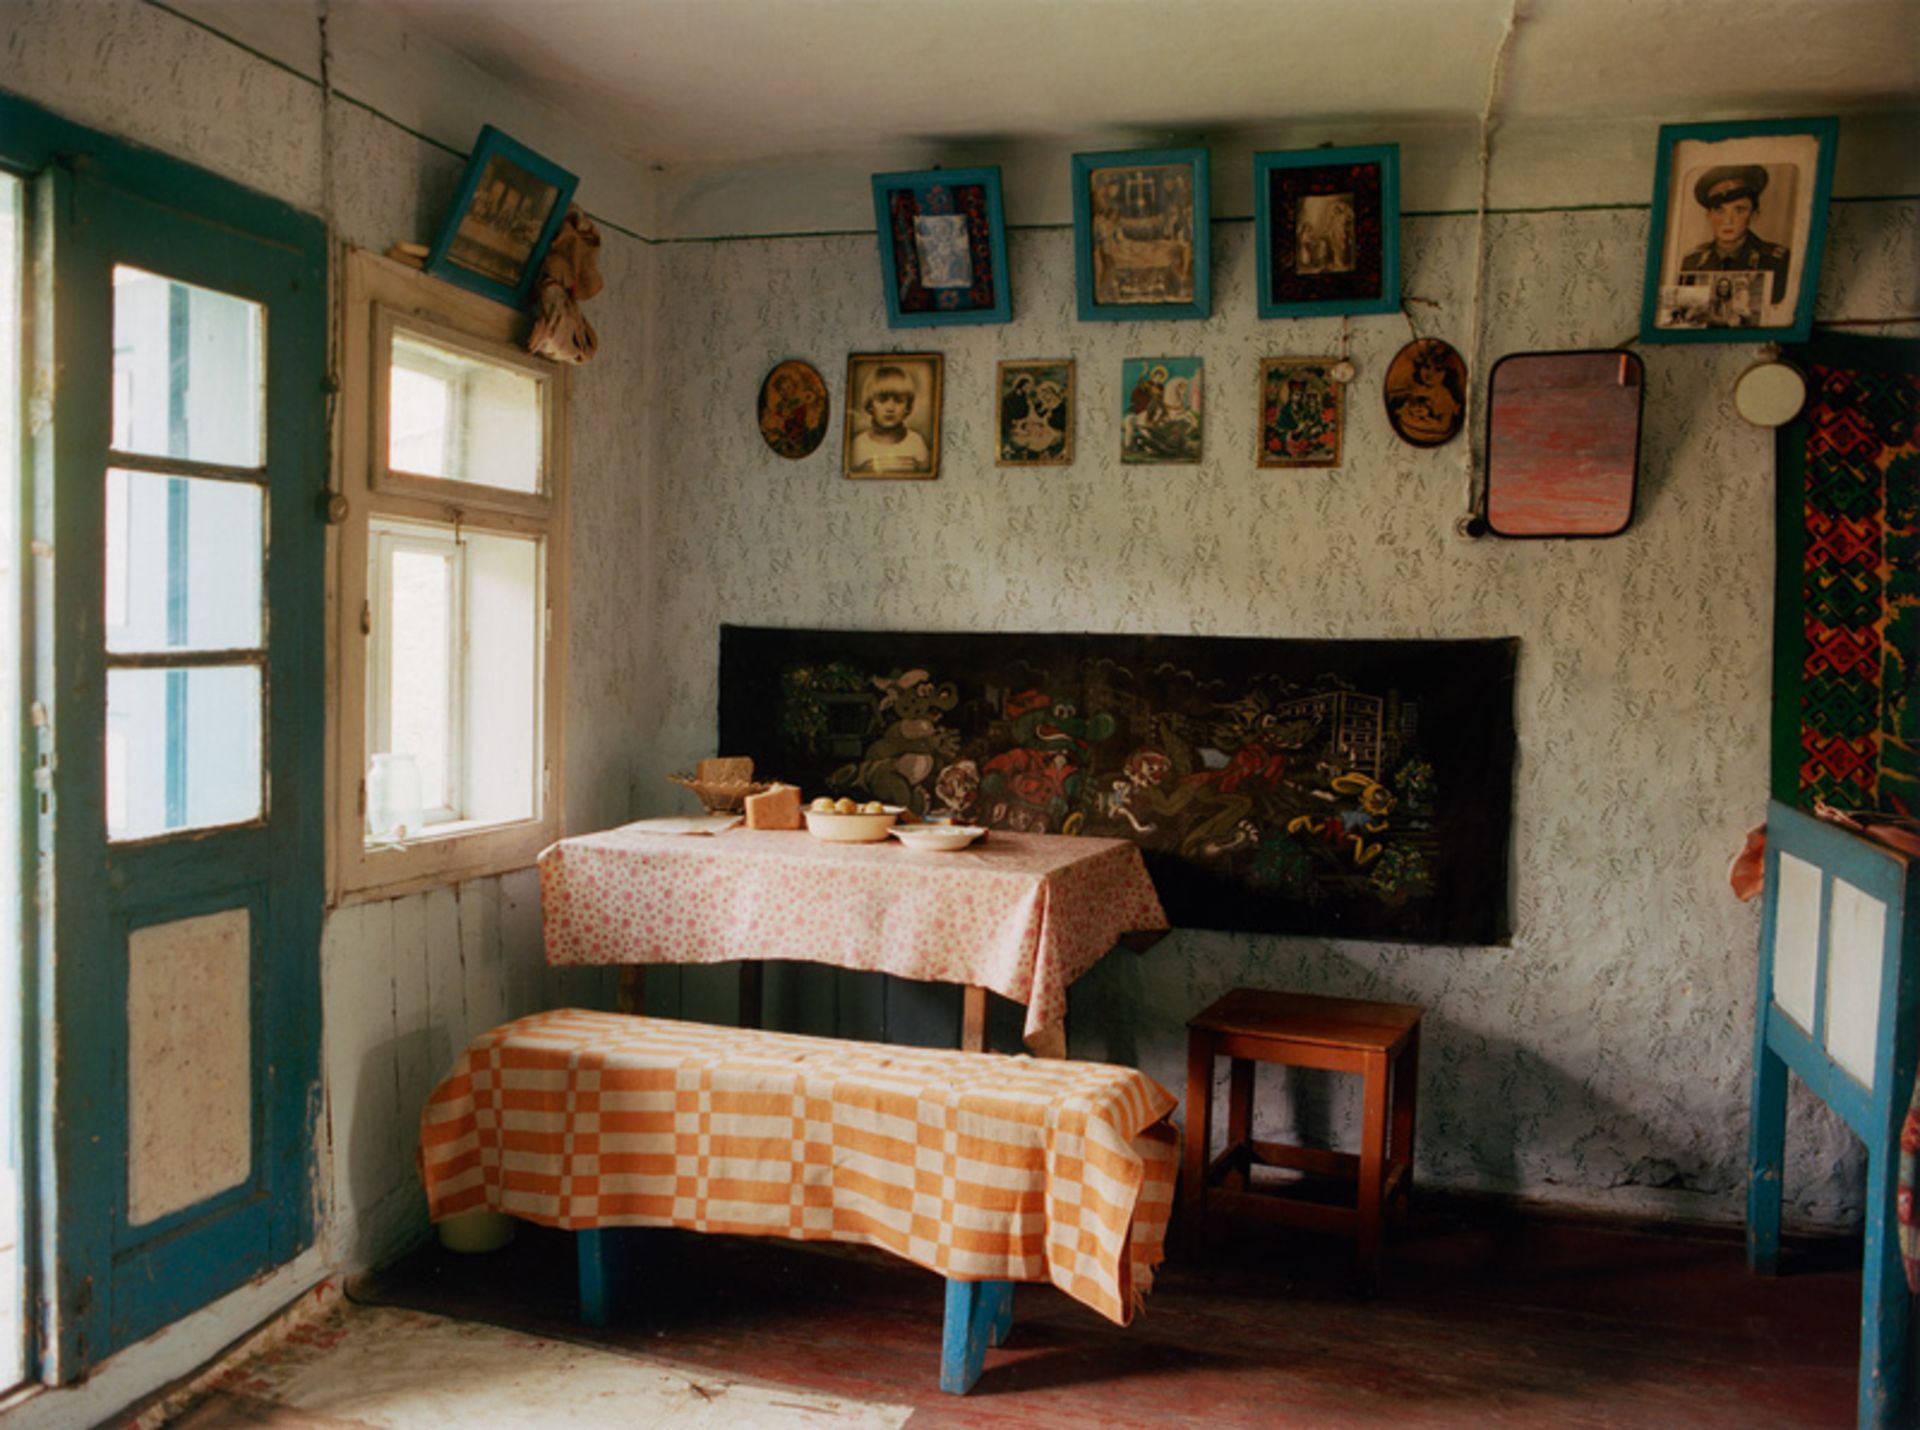 Rosswog, Martin: Interiors from the series "Heritage"